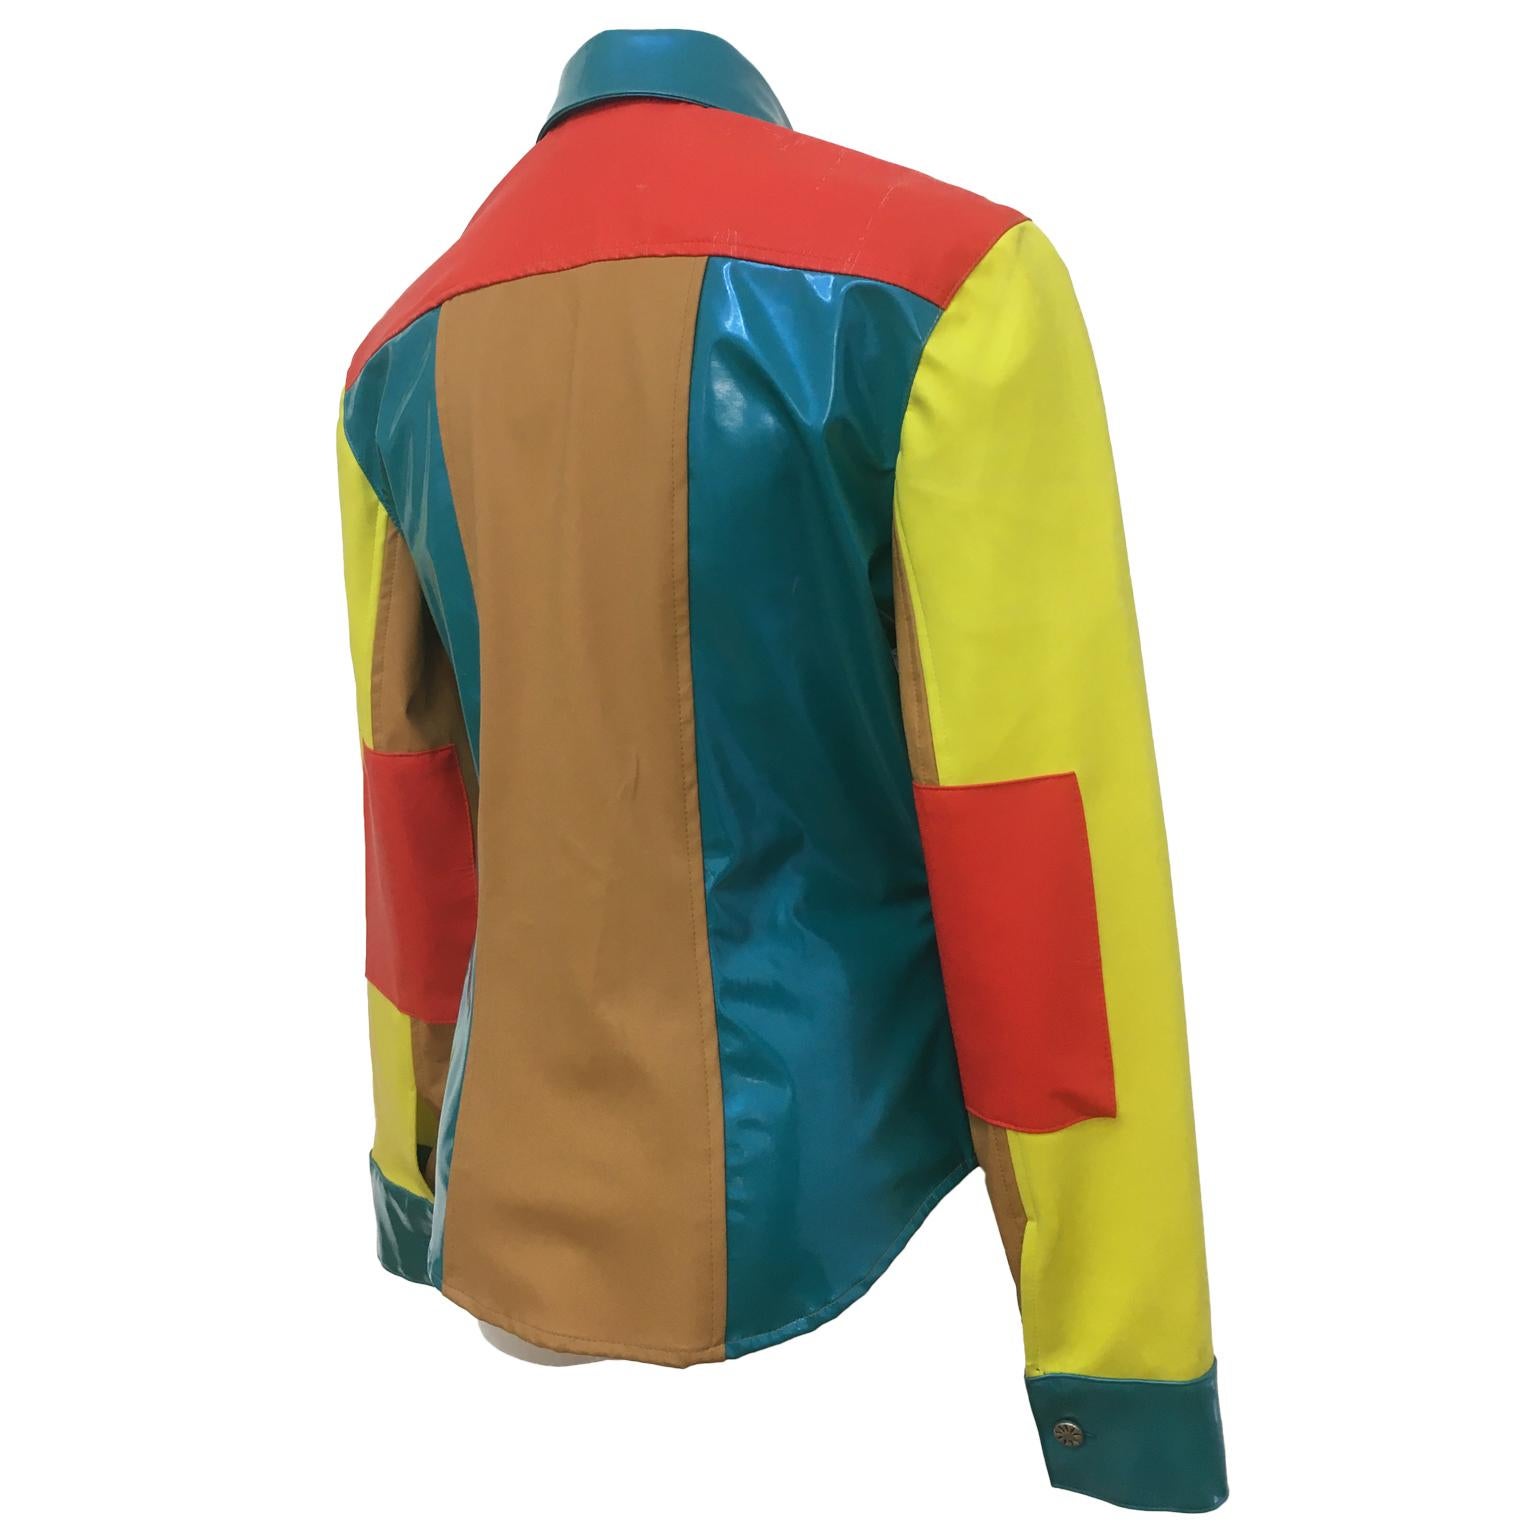 Todd Oldham Times Seven blouse / Jacket from 1990s. 
Features multi bright colour vinyl materials and buttons along the center front. Beautifully shaped waist line. Very rare find.
Fits like 36 EU.